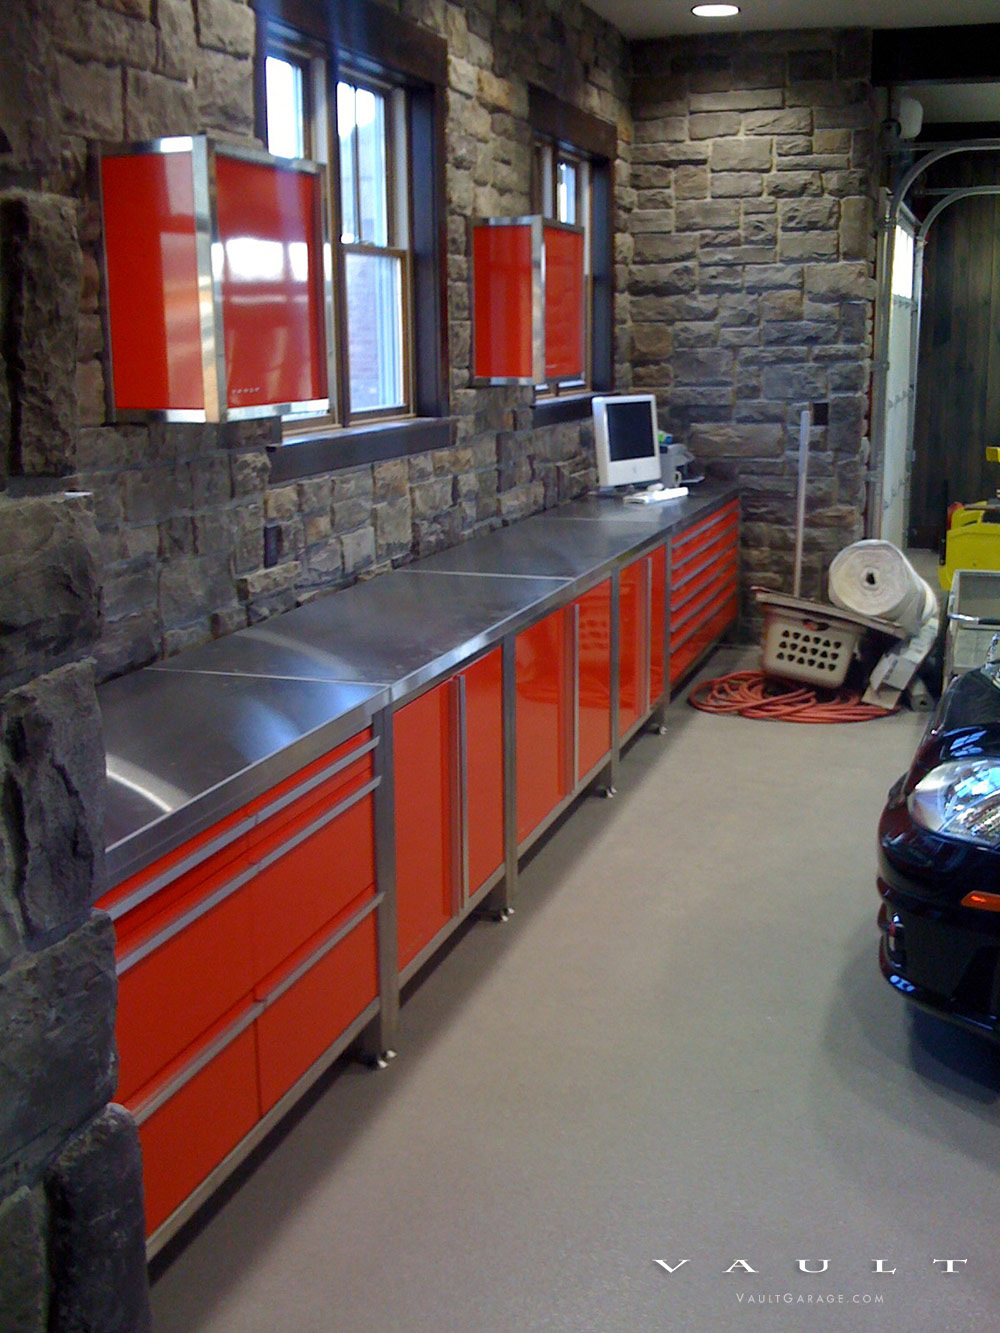 Professional Series Garage Cabinets by VAULT